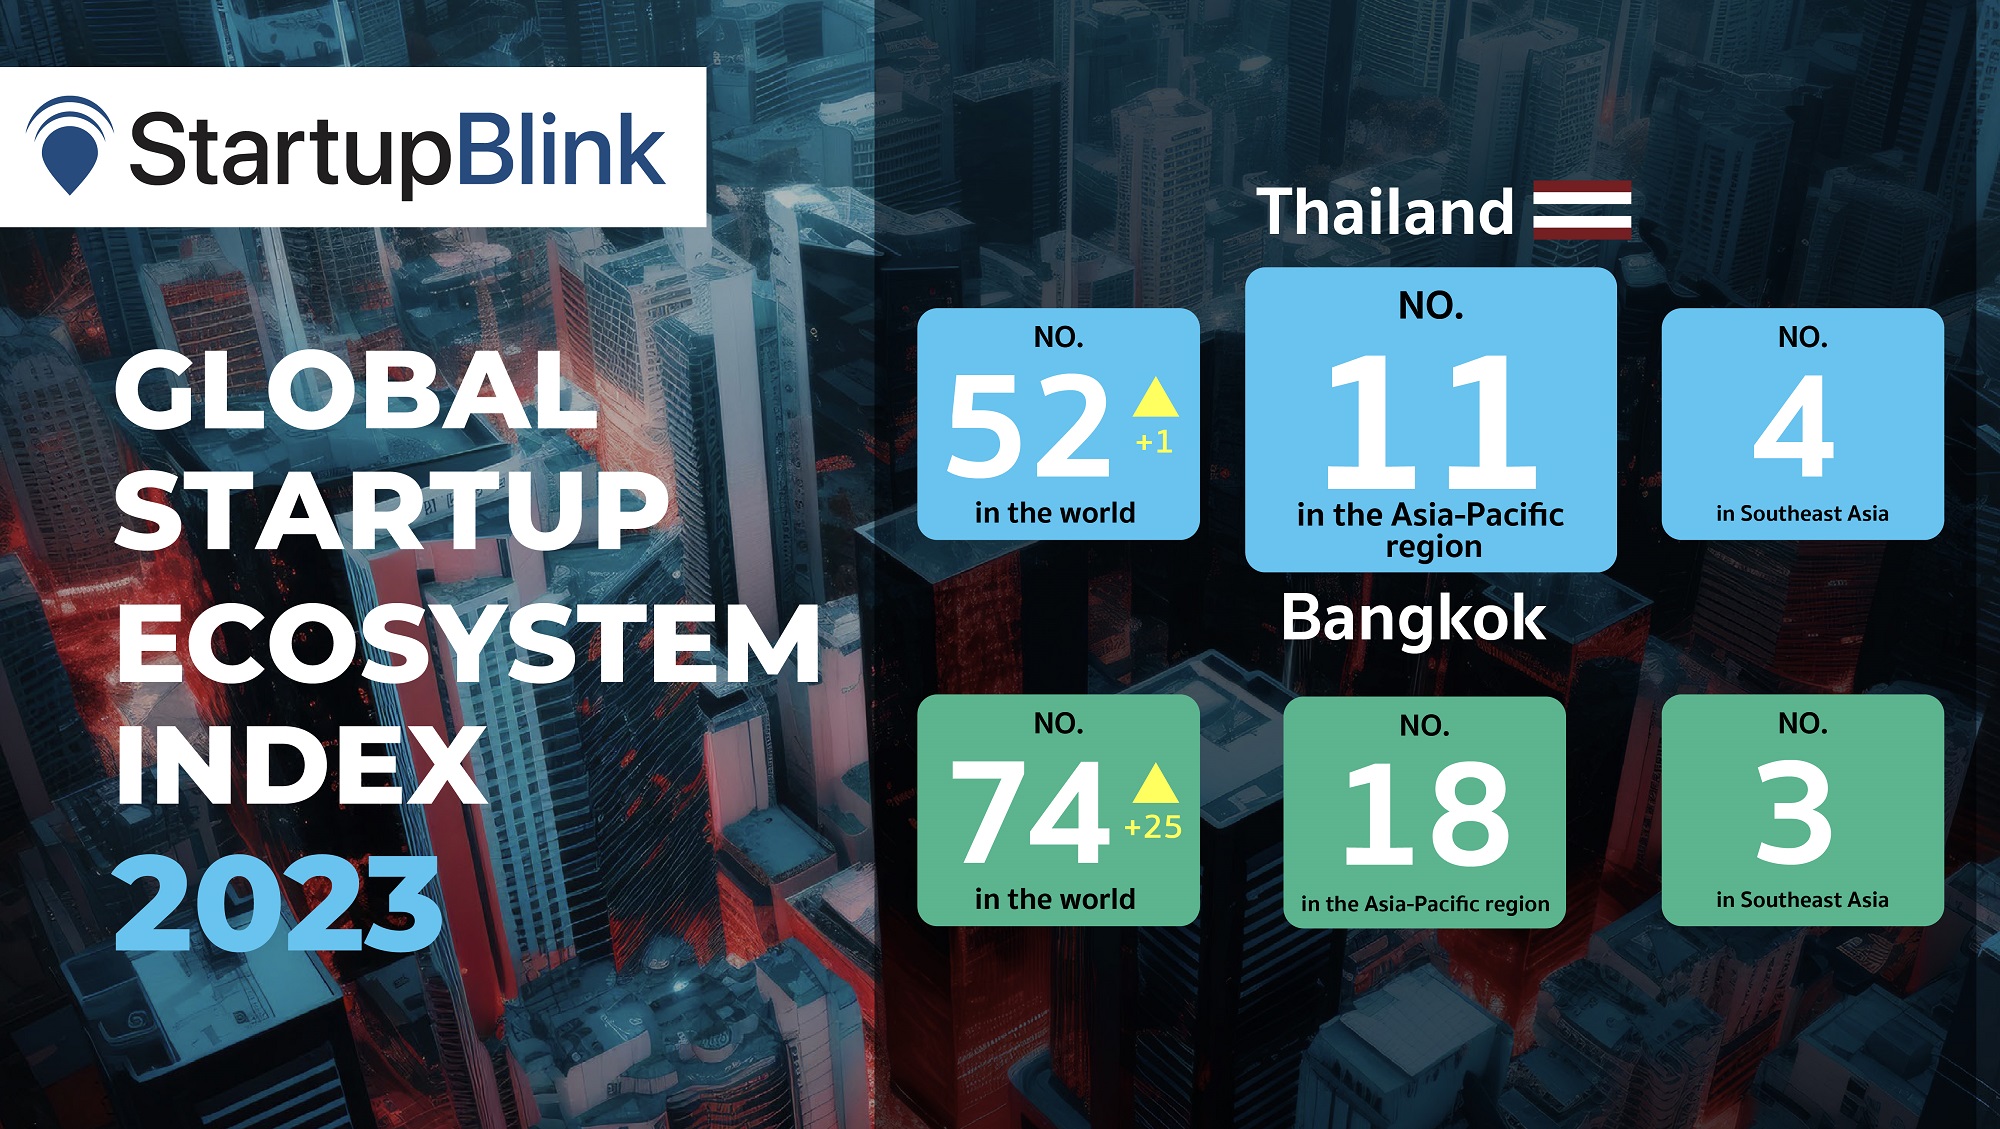 NIA launches the profile of Thailand for 2023 with strengths in establishing startup businesses